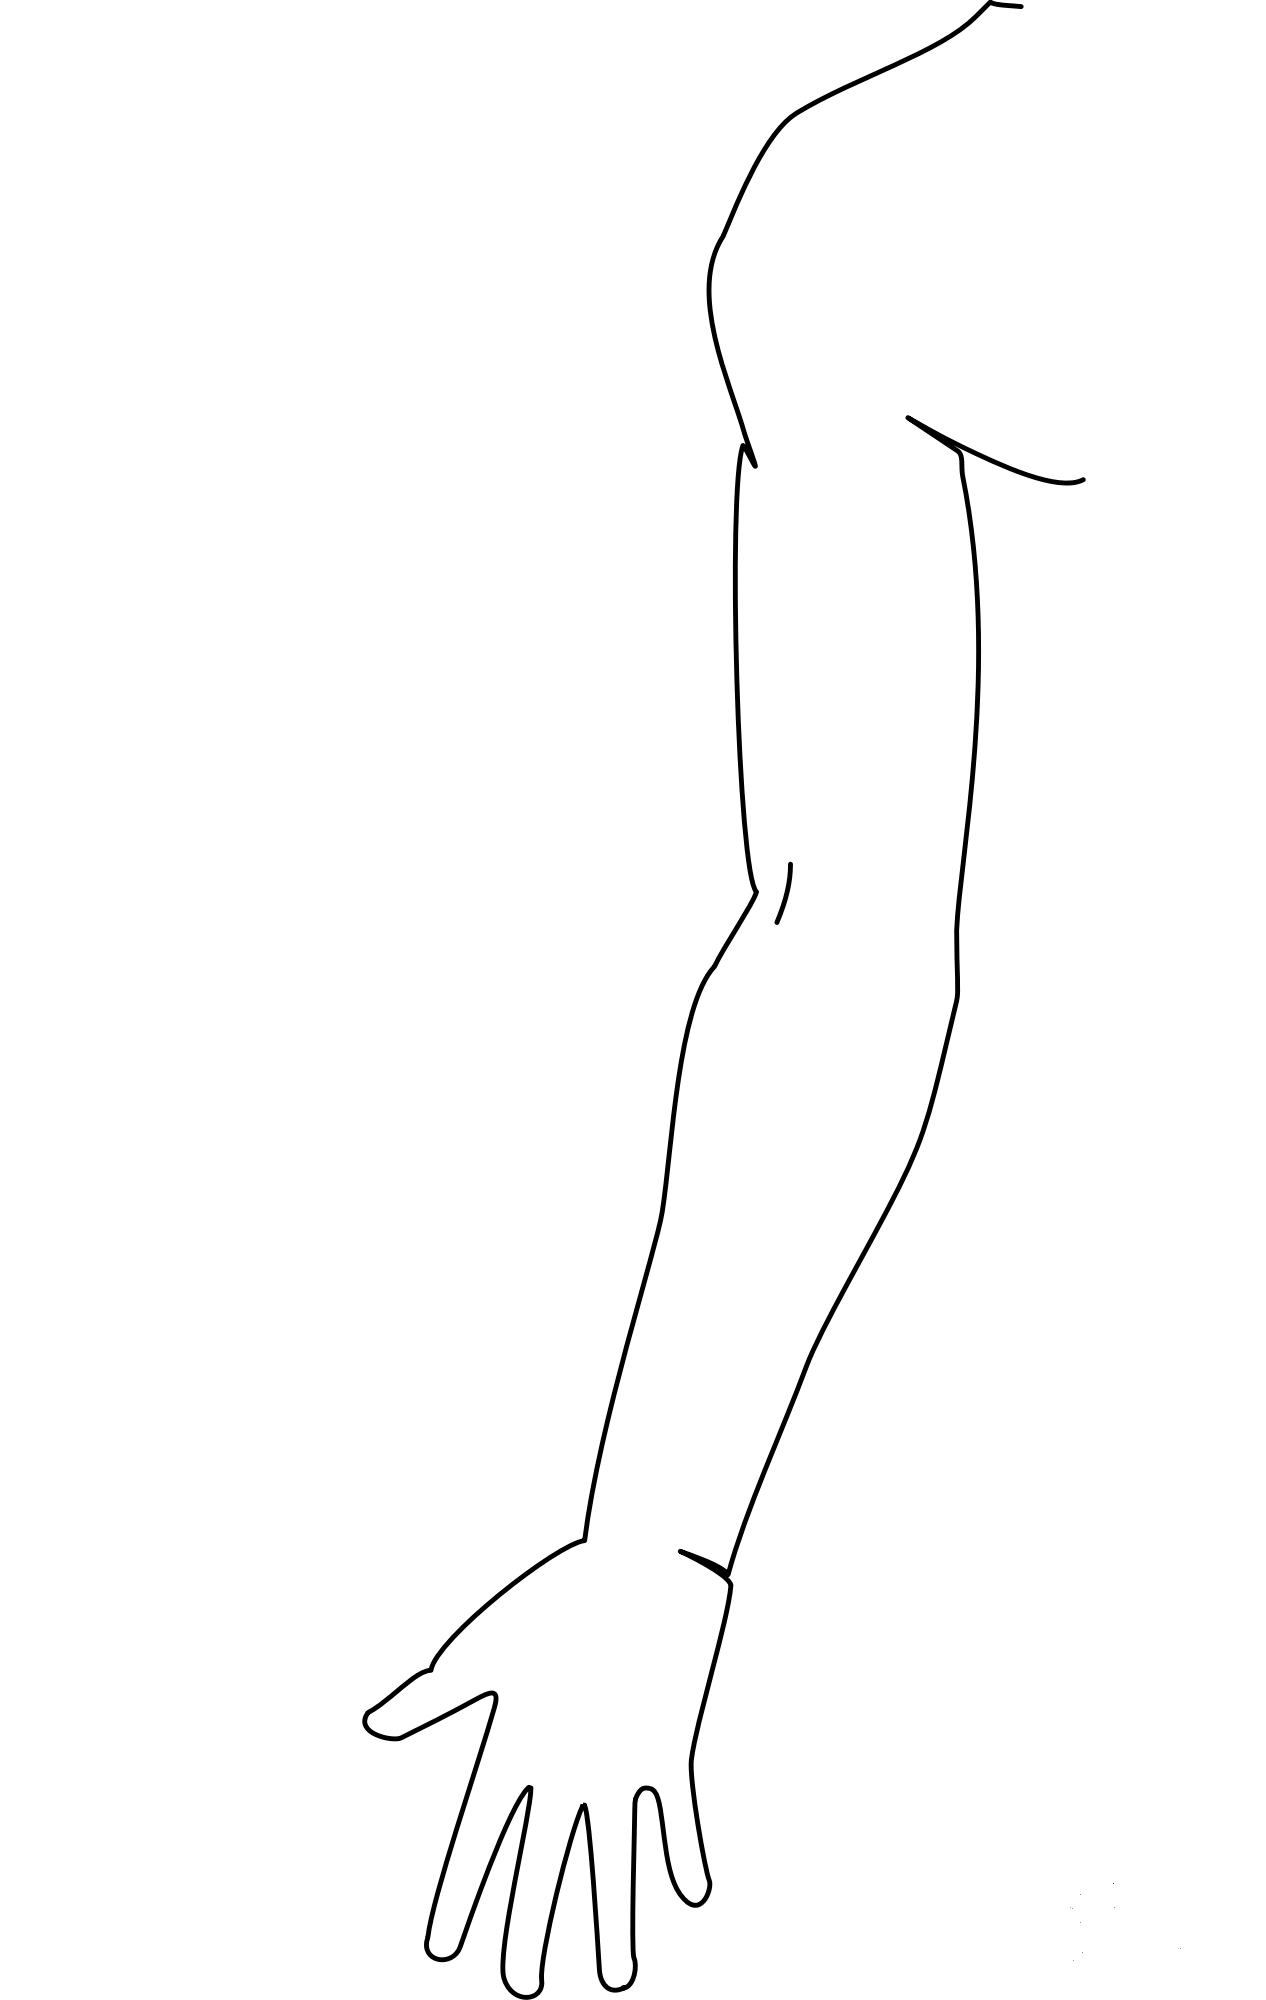 Human Arm coloring page - ColouringPages